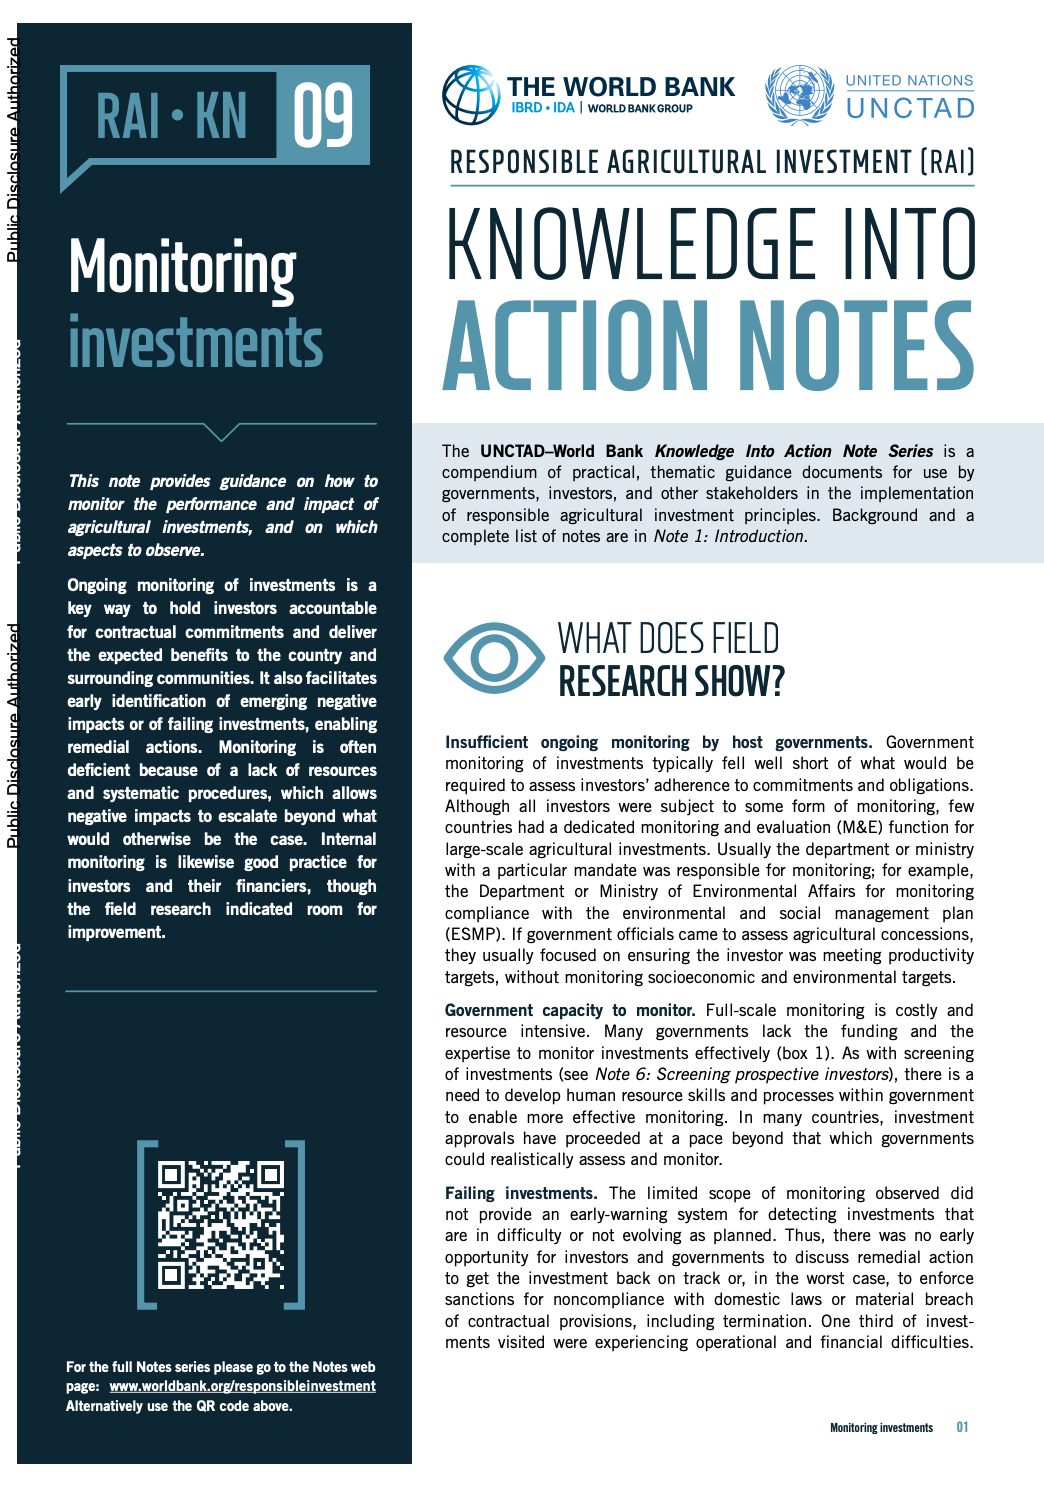 Responsible Agricultural Investment (RAI): Knowledge into Action Notes series - 9 - Monitoring investments cover image